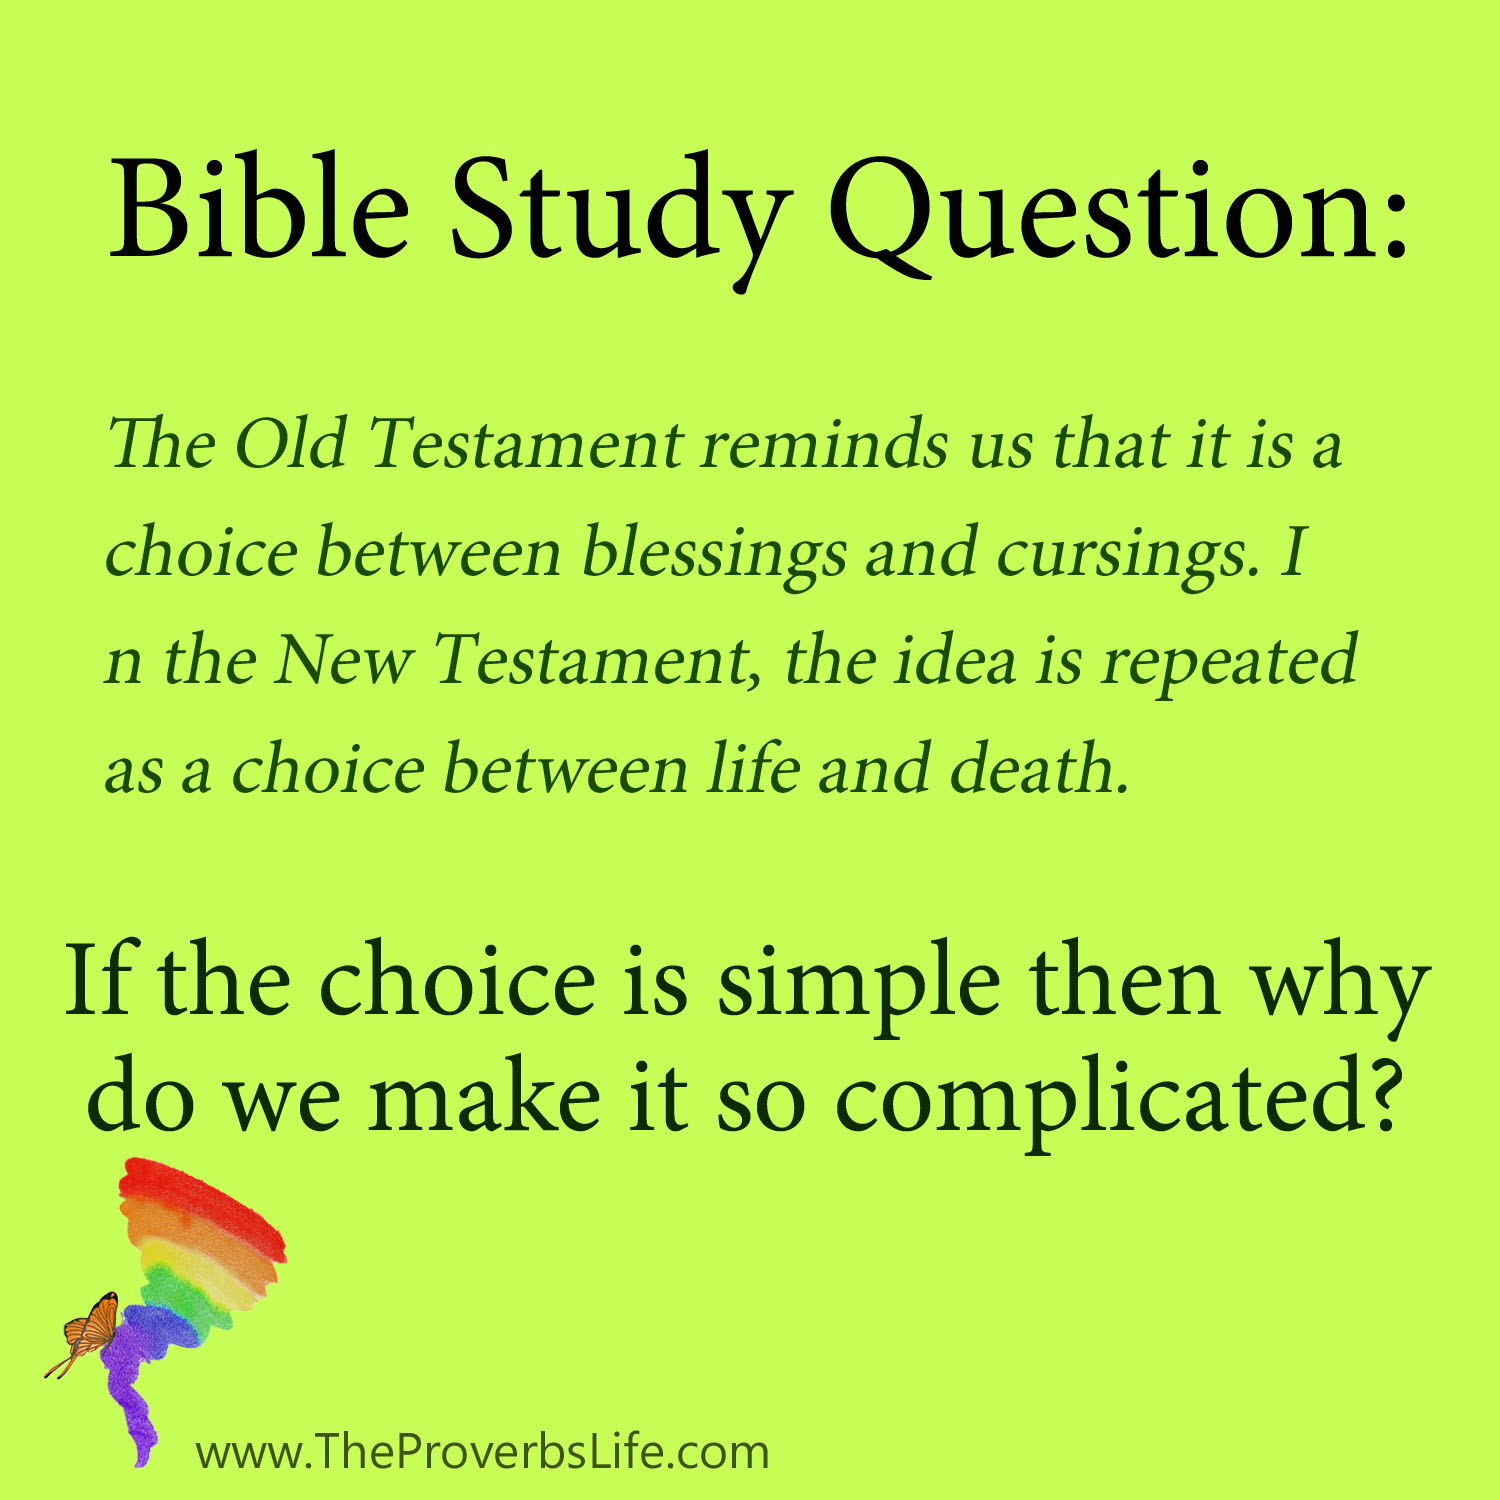 Bible Study Questions - simple choice between life or death